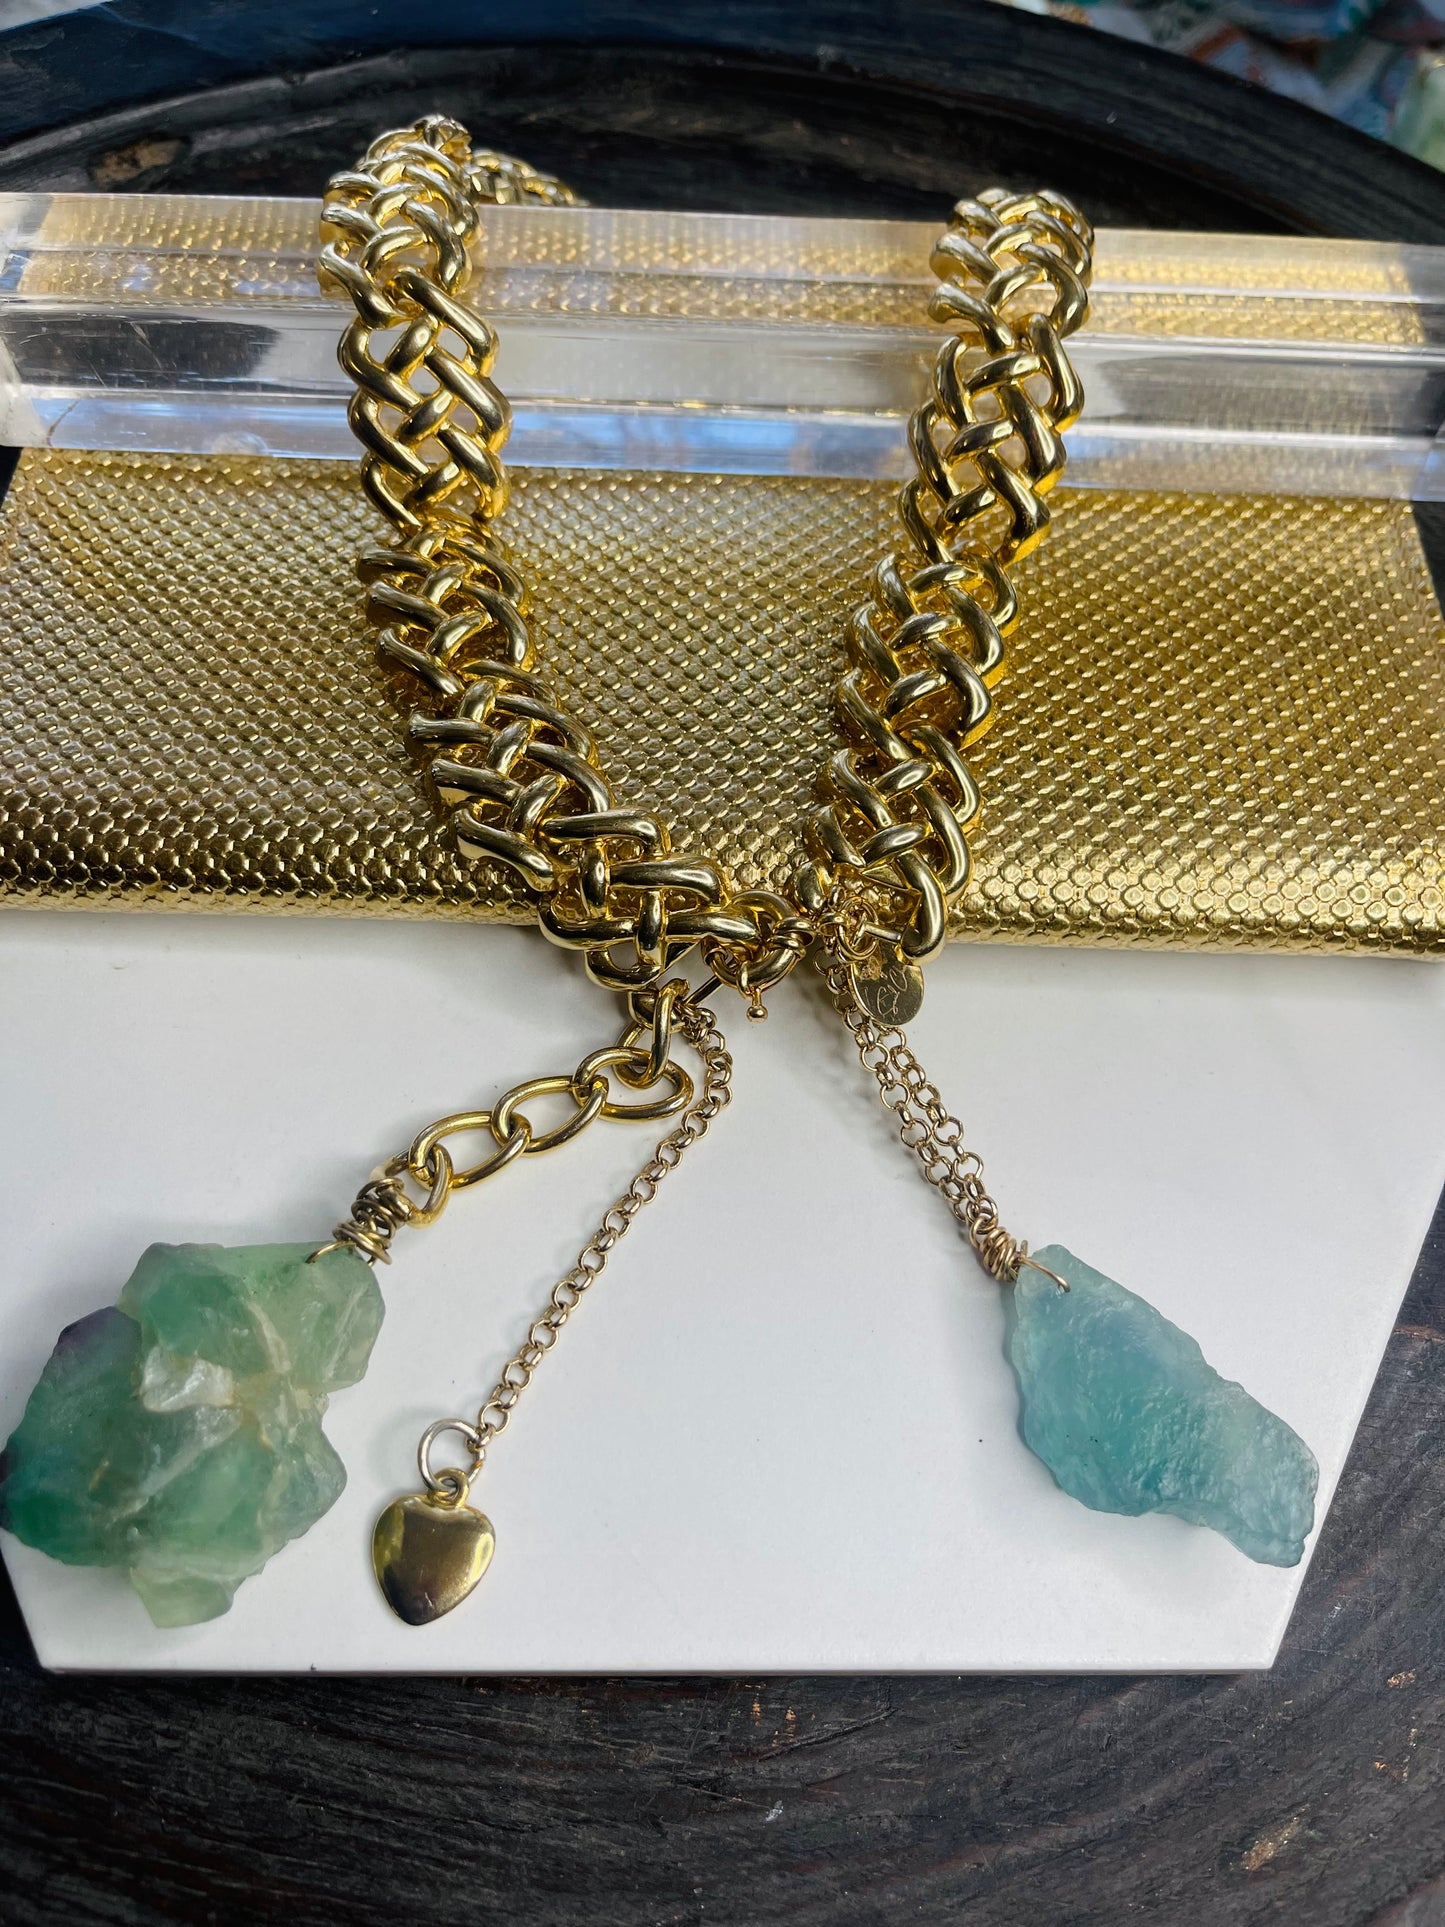 Raw Chunky Collar - Rainbow Fluorite Crystal Gold Soul Chain Necklace